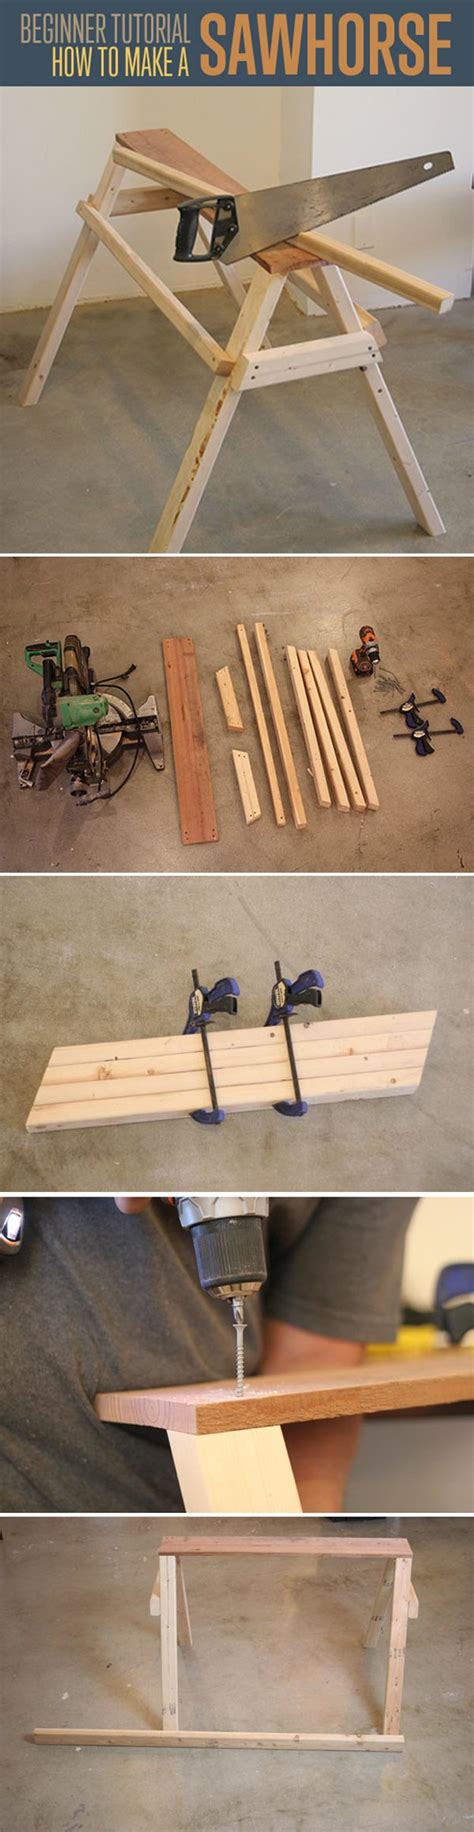 Easy Woodworking Projects Easy Diy Crafts Fun Projects